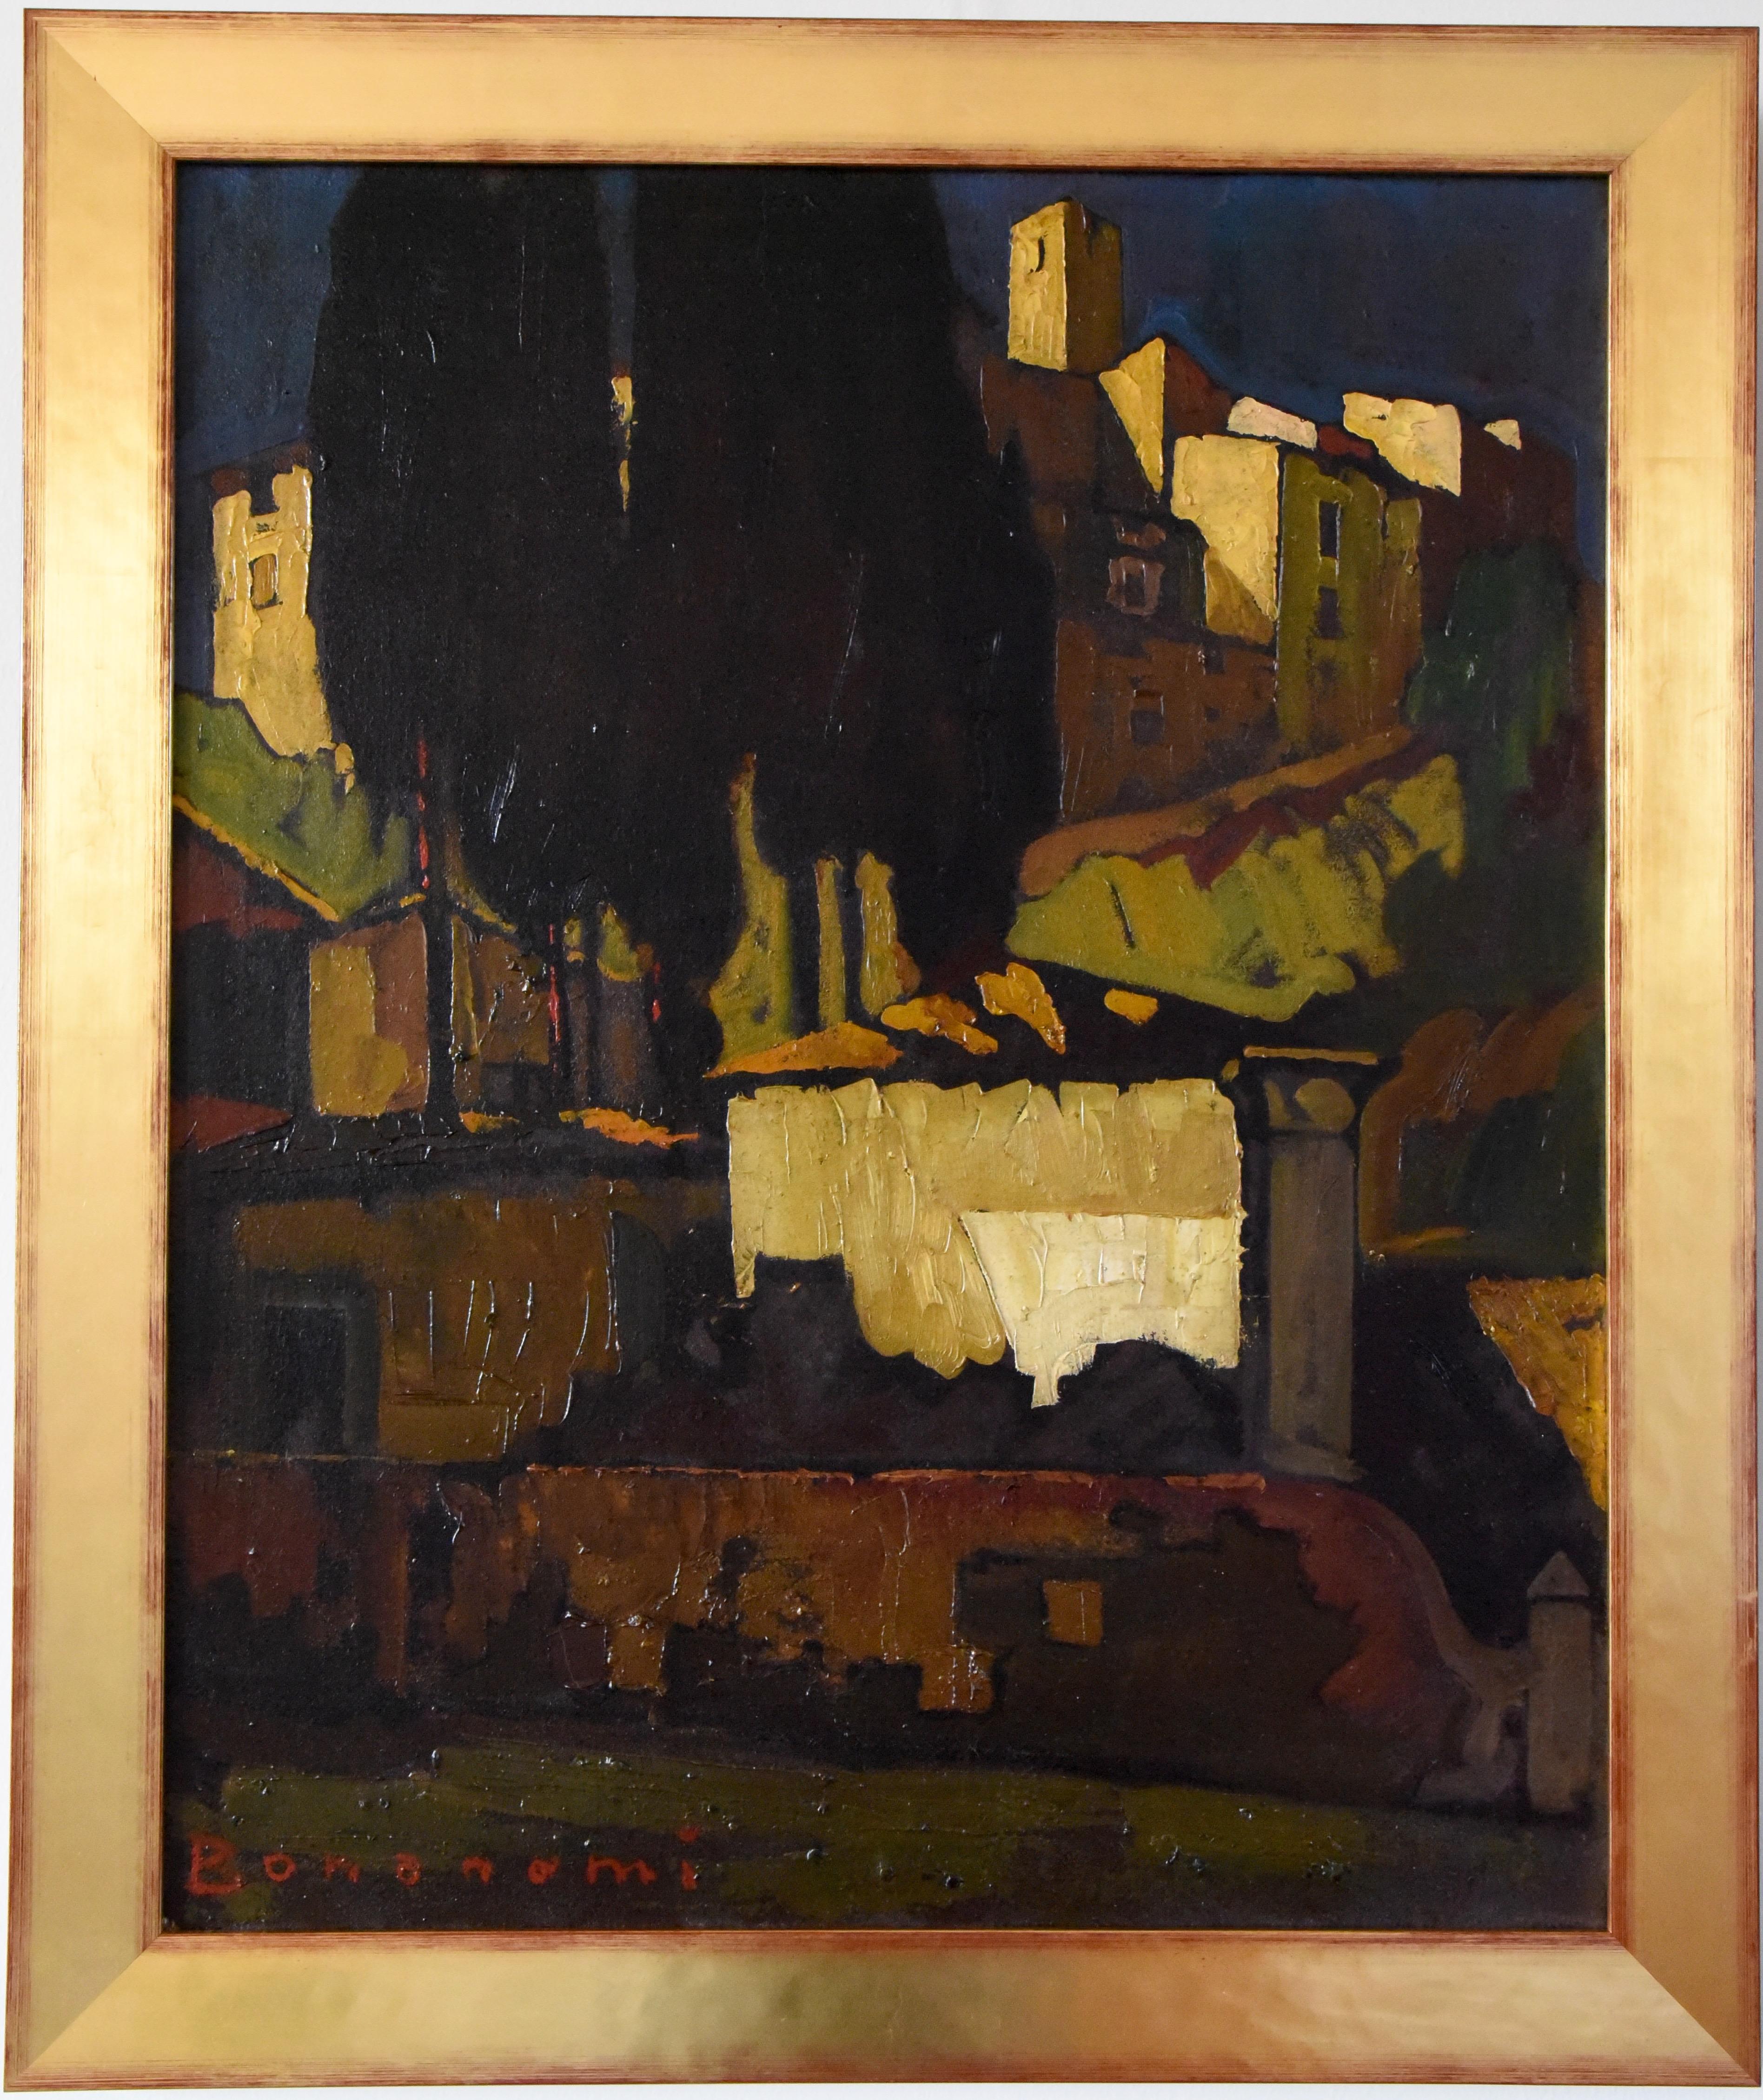 Beautiful Art Deco oil painting of a typical Italian village with cypresses by the artist Cesare Bonanomi, born in Piacenza, Italy in 1875.
Painter of portraits, genre scenes and landscapes.
Bonanomi exhibited in Paris at the Salons des Artistes